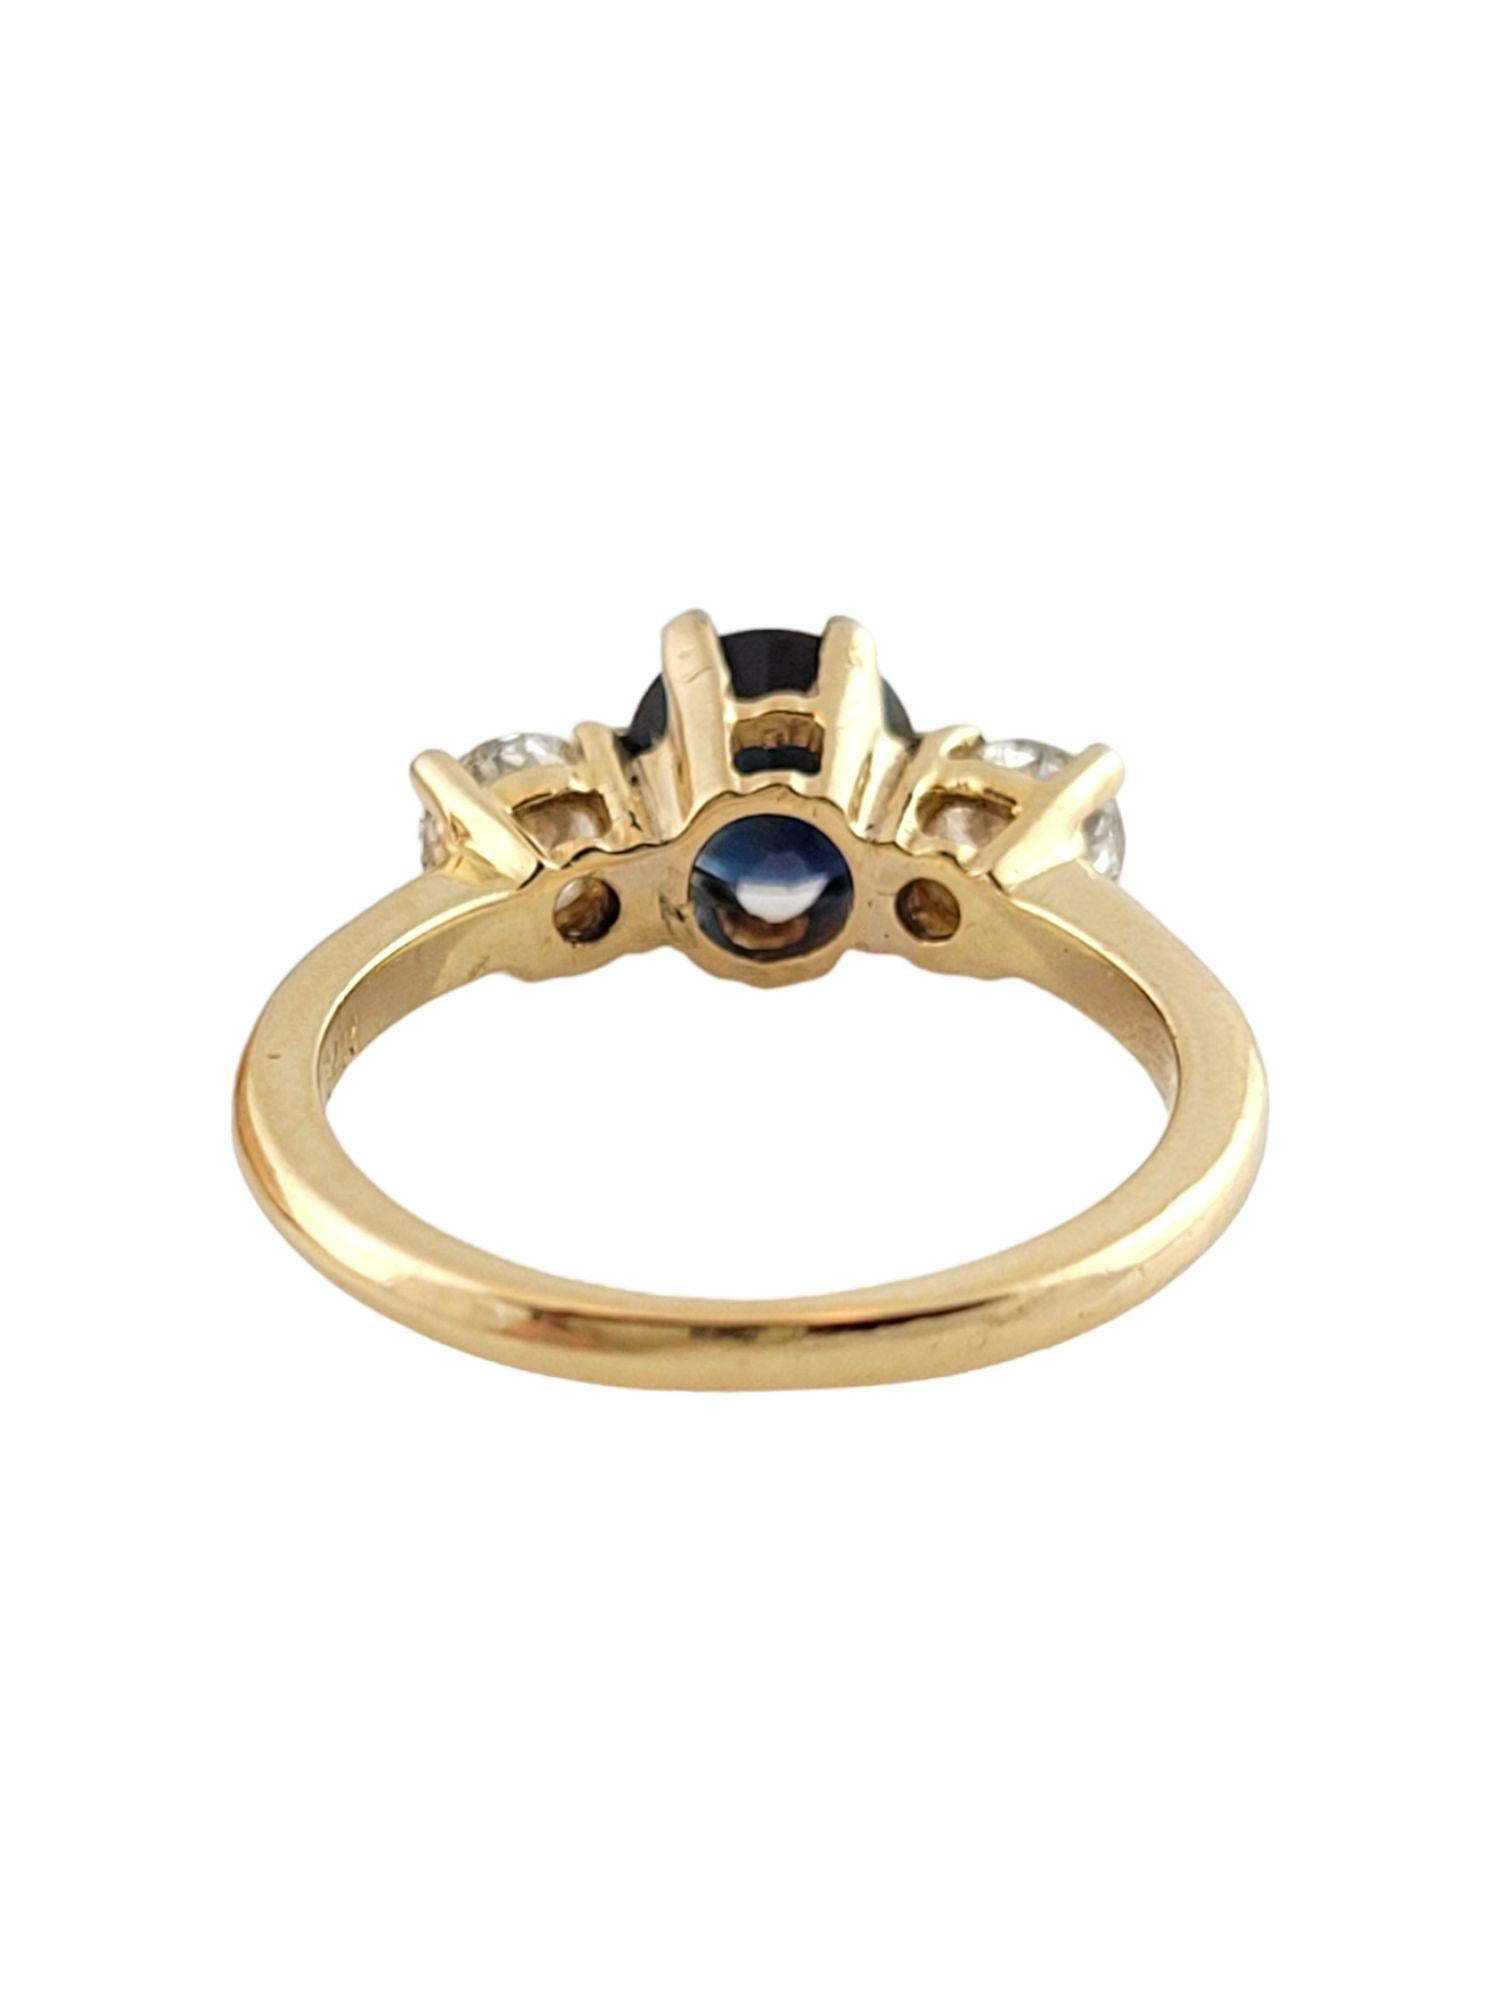 Women's 14k Yellow Gold Diamond and Natural Sapphire Ring For Sale